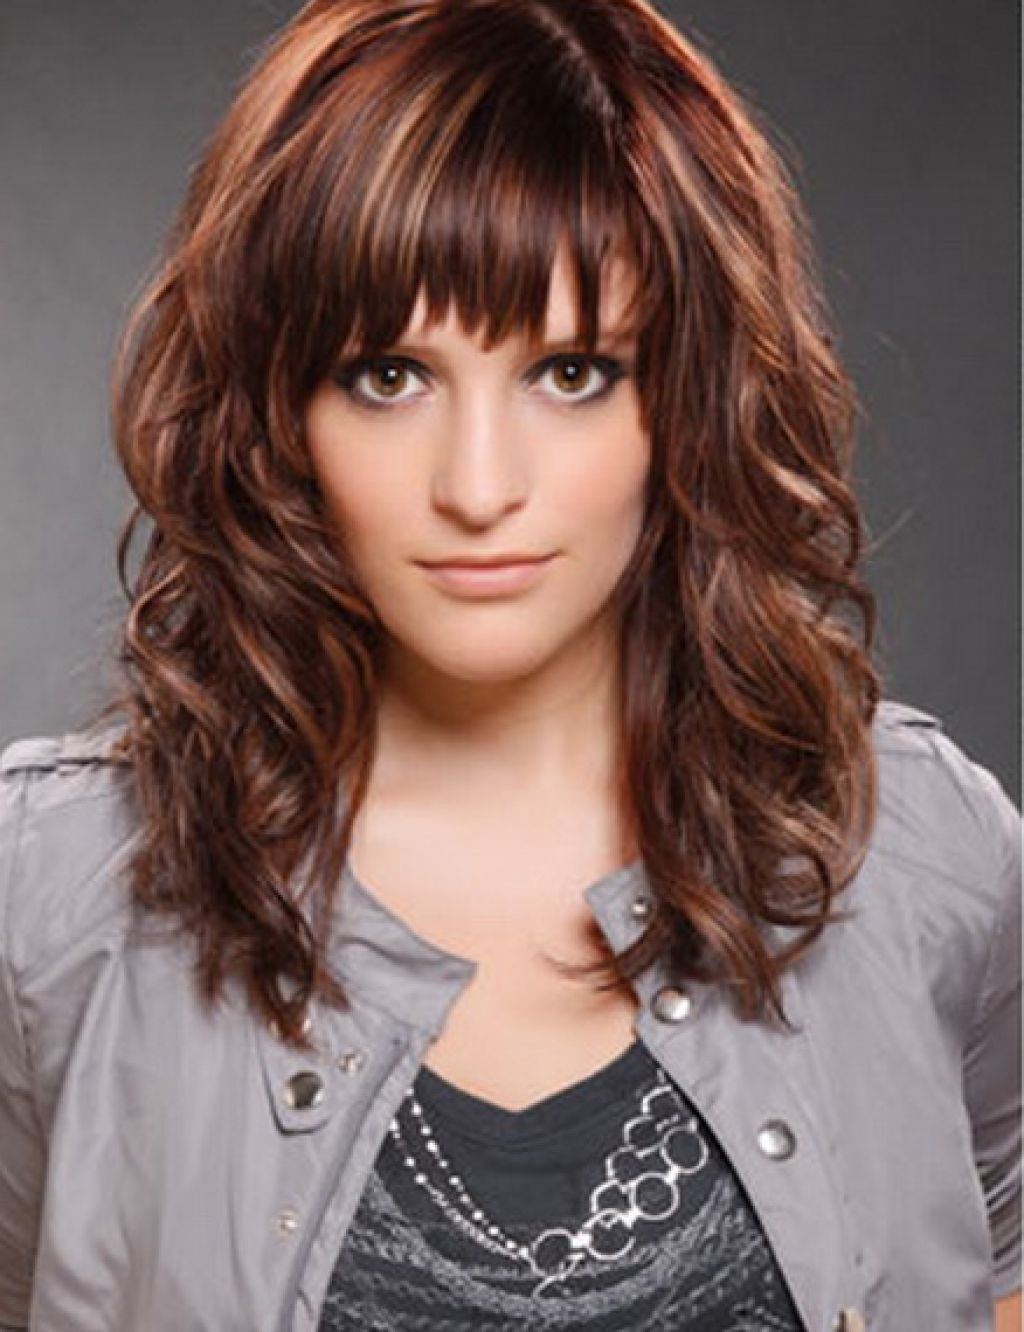 Medium Curly Hairstyles With Bangs
 Cute hairstyles for medium curly hair with side bangs